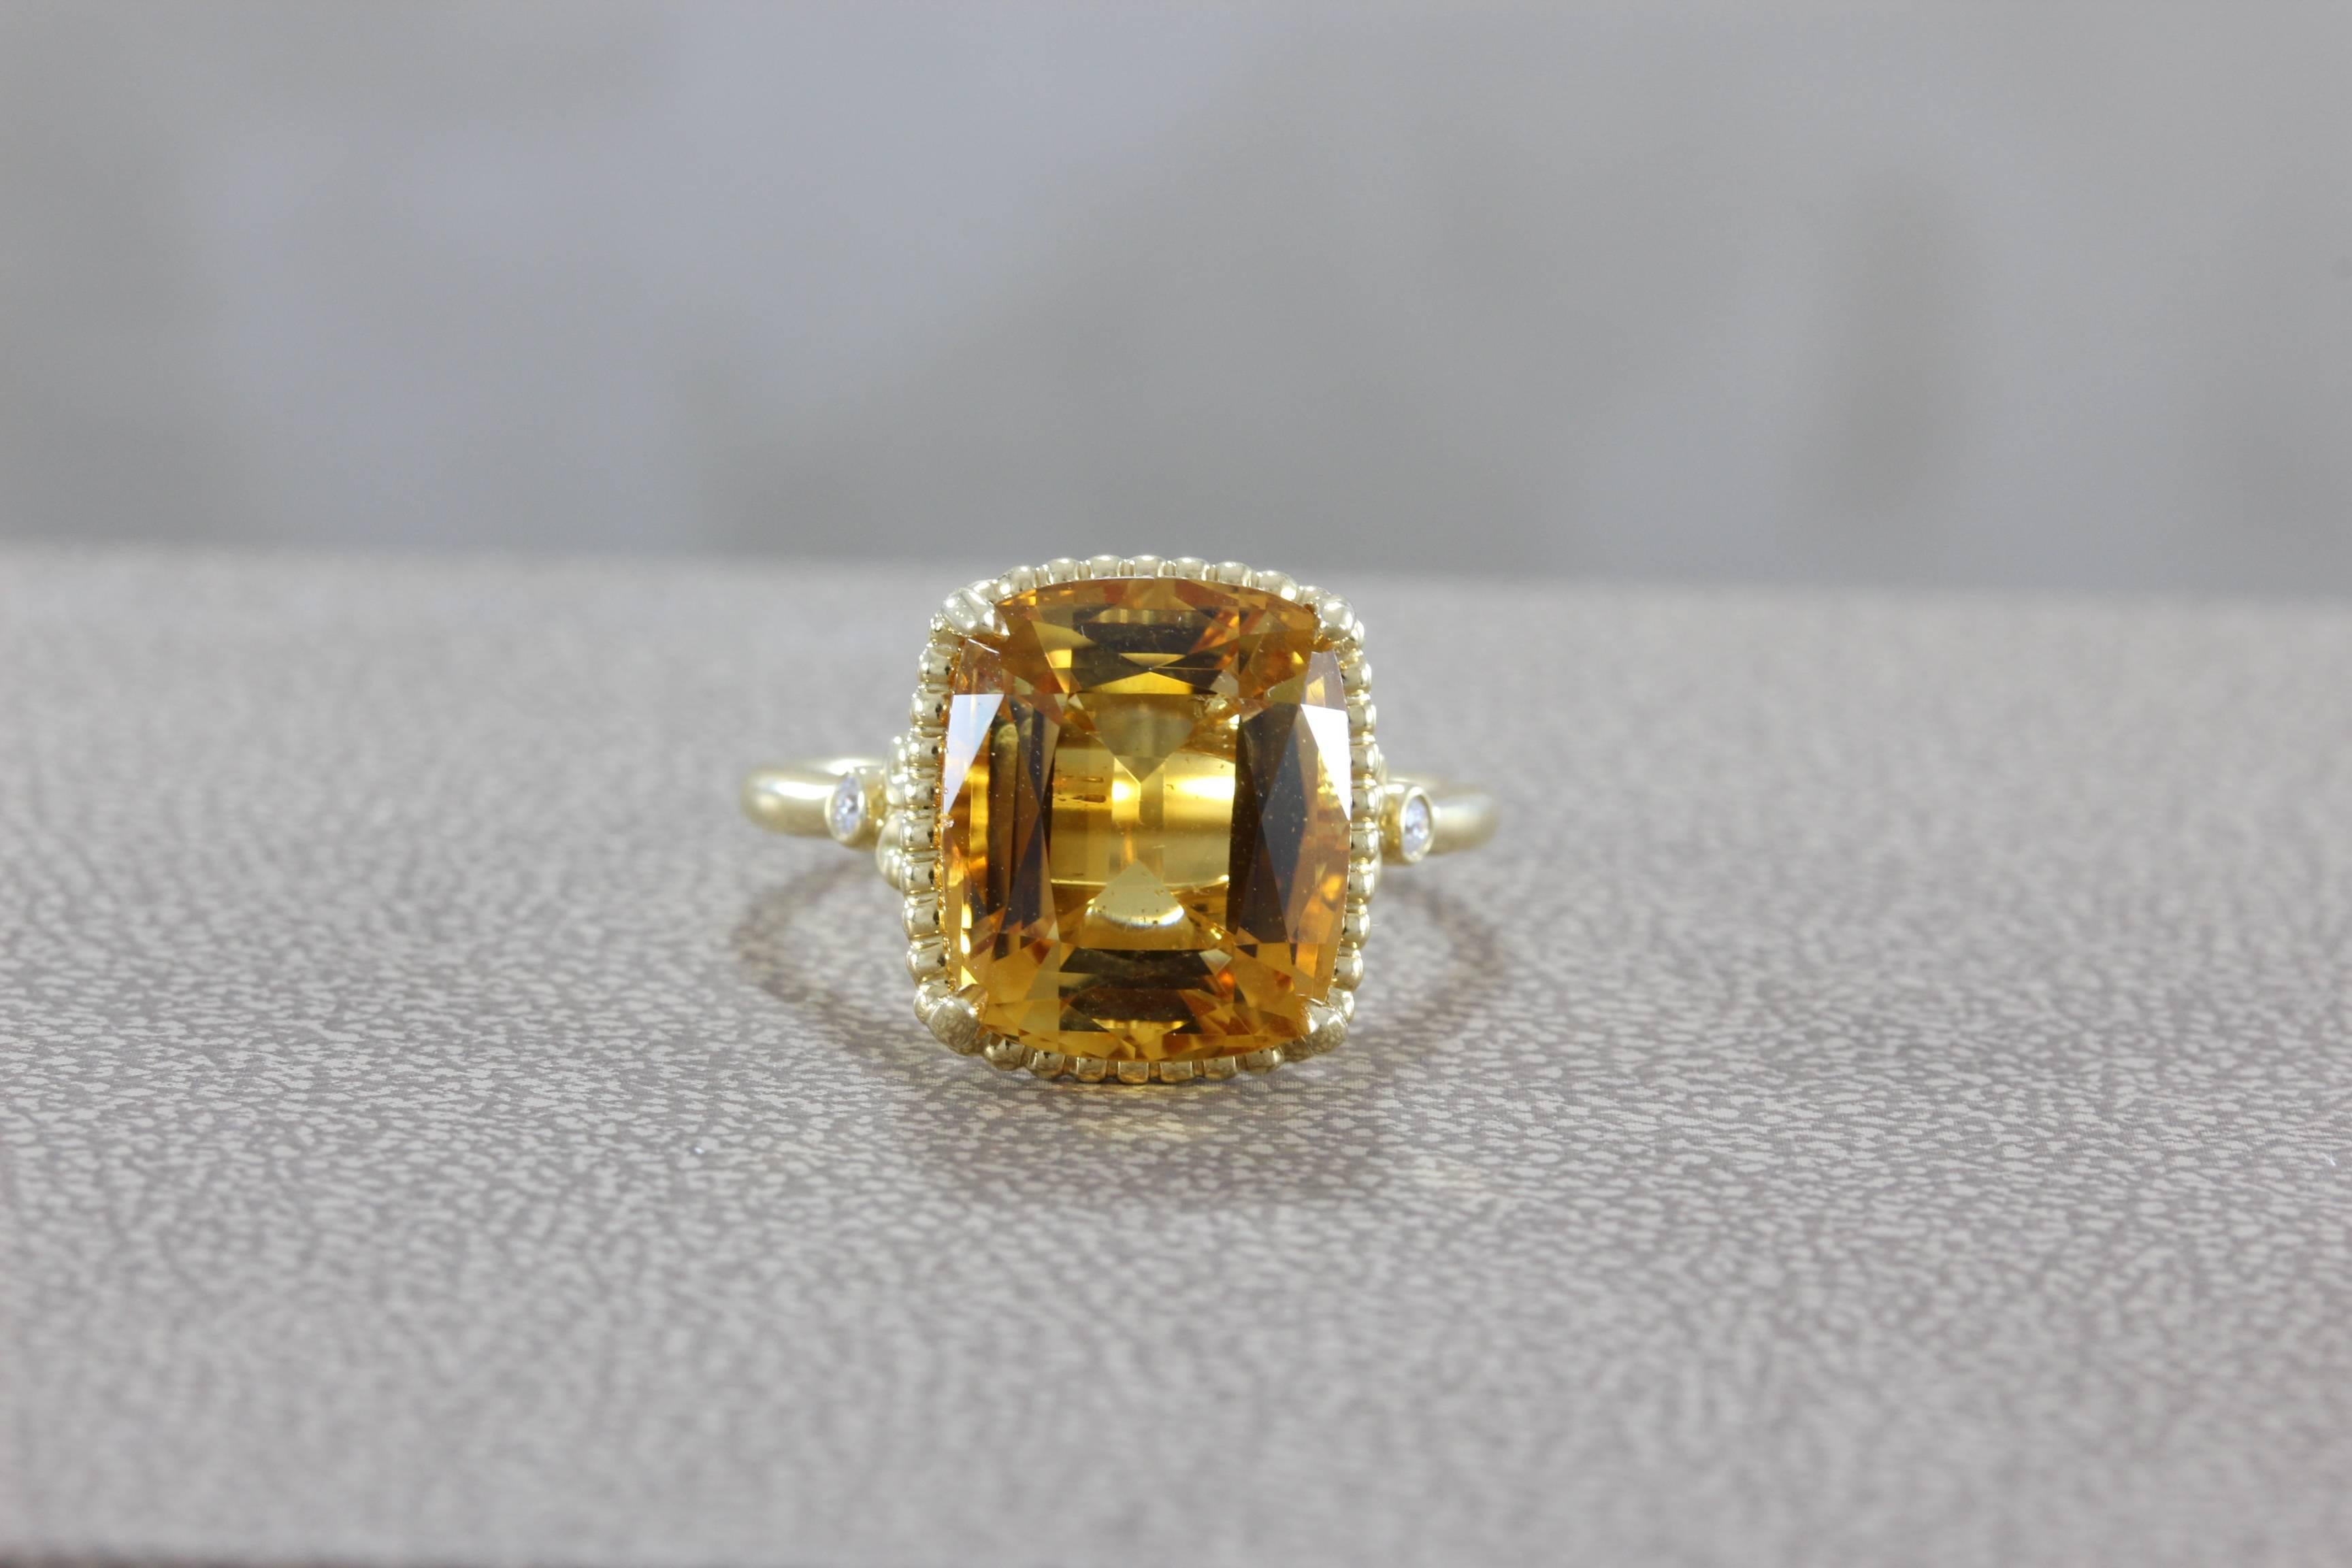 This Tiffany and Co. ring features a gem quality (approximately) 12 carat cushion cut citrine.  Set in 18K yellow gold with two diamond accents.  A great ring to wear everyday or dress up for the evening.  

Ring size 8 ½
